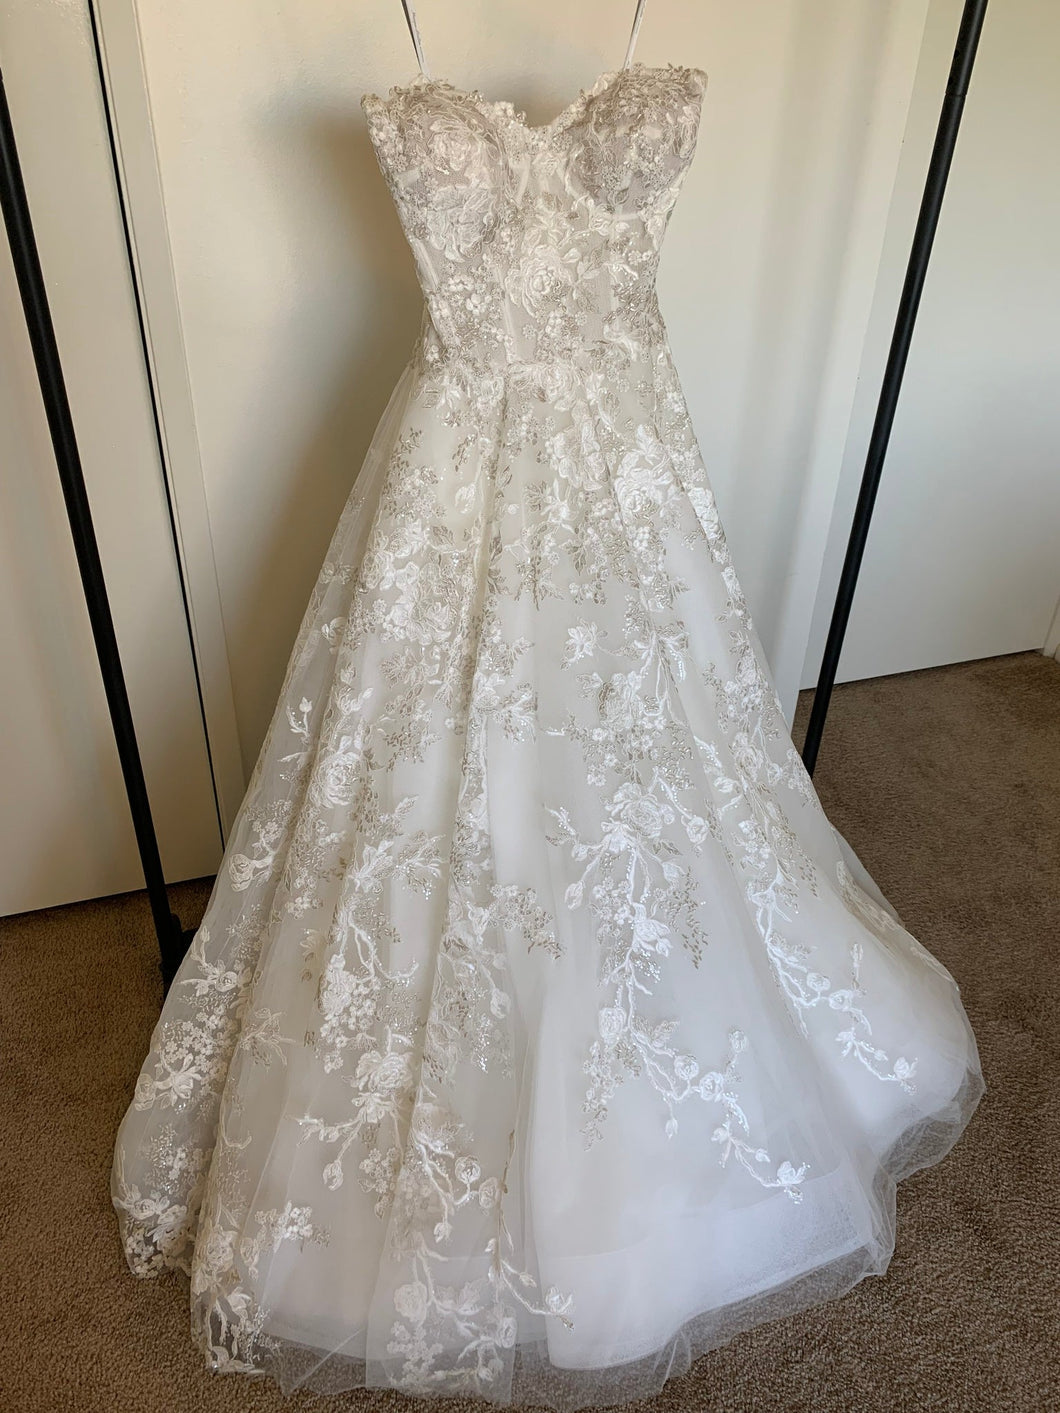 Monique Lhuillier 'Lakely' wedding dress size-04 PREOWNED